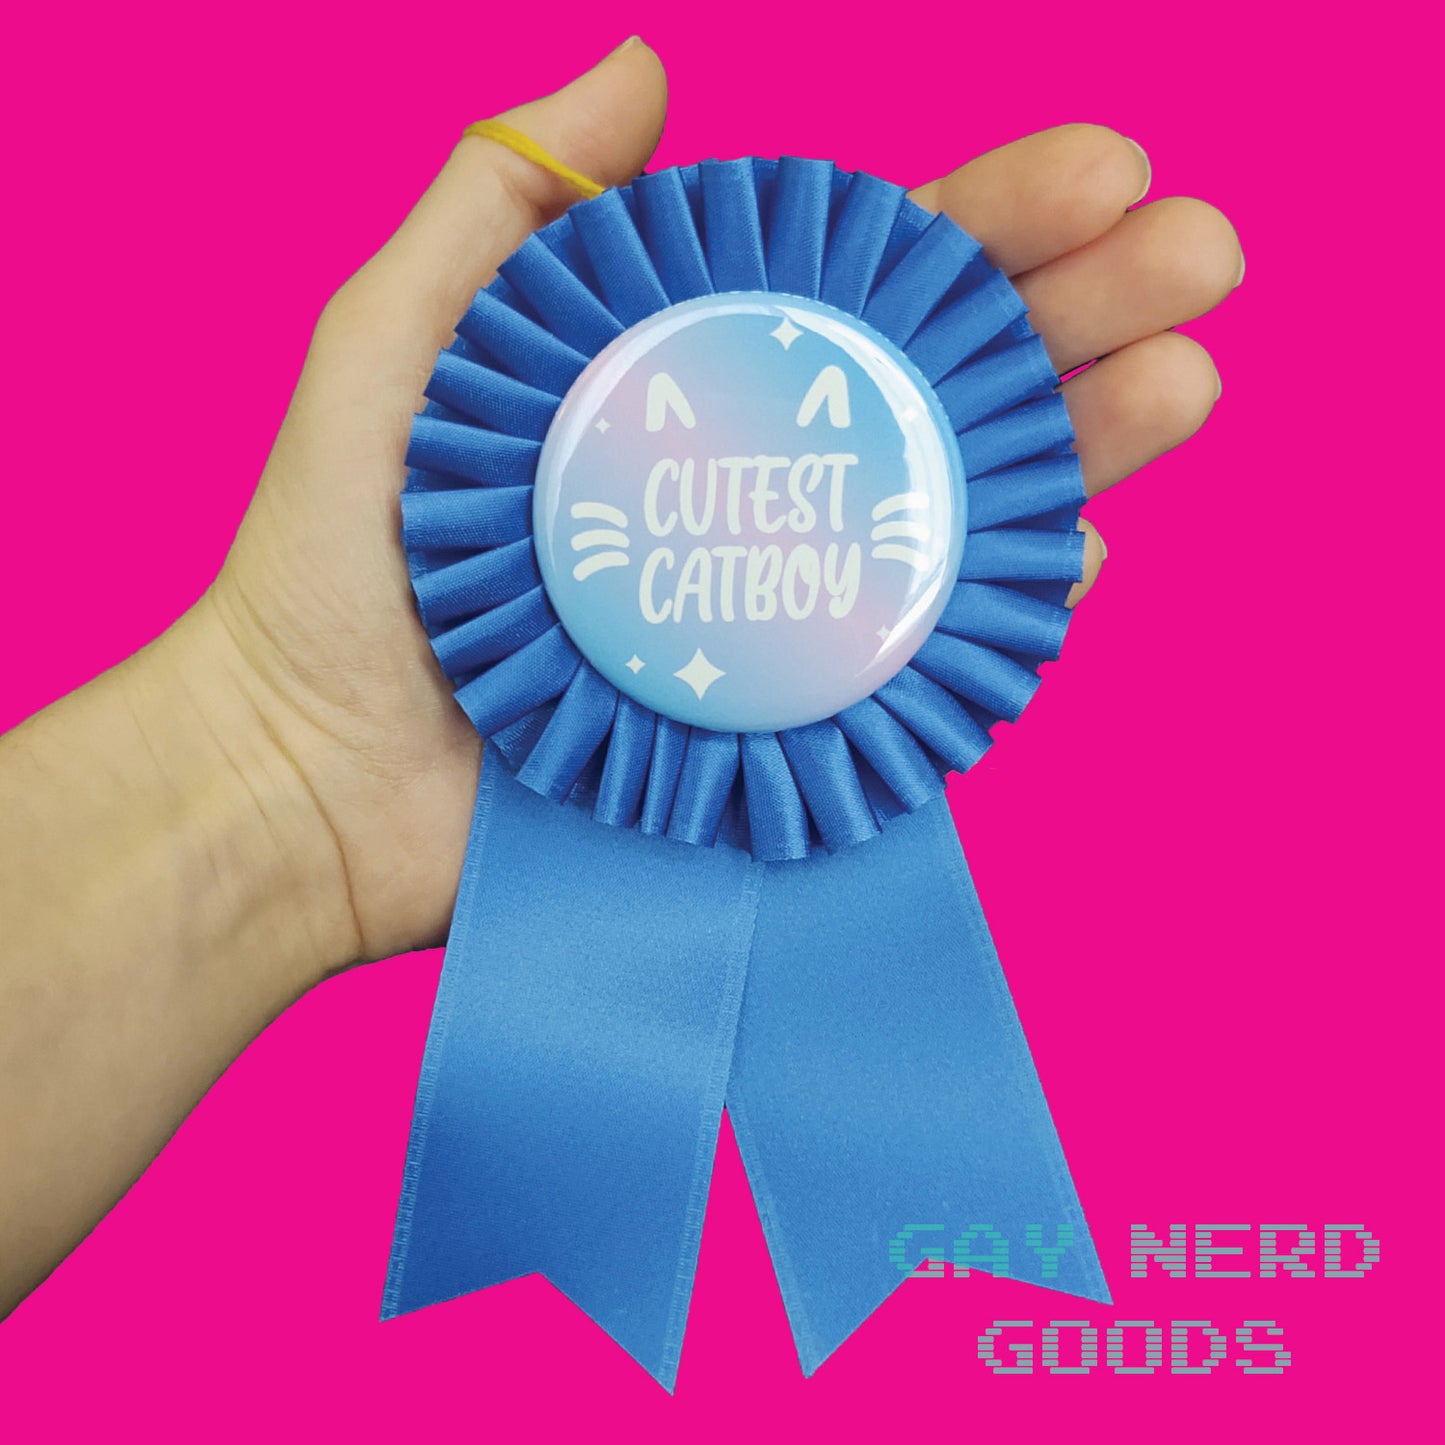 hand holding the cutest catboy prize ribbon against a pink background